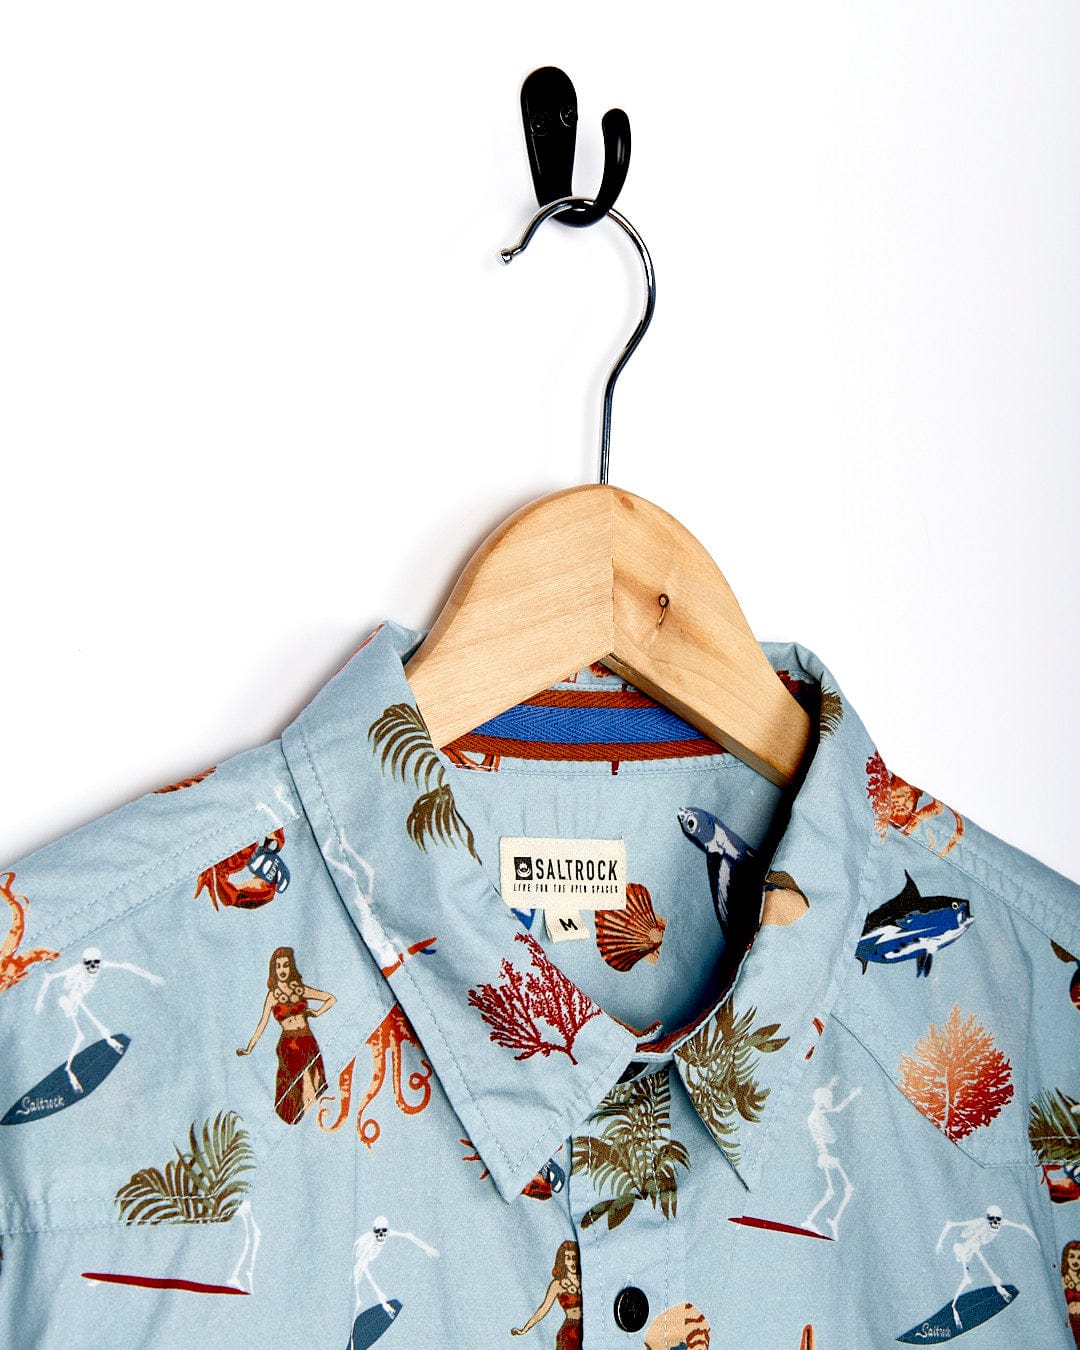 A Saltrock Ruan - Mens Washed Short Sleeve Shirt - Light Blue with hawaiian animals and surfboards on it.